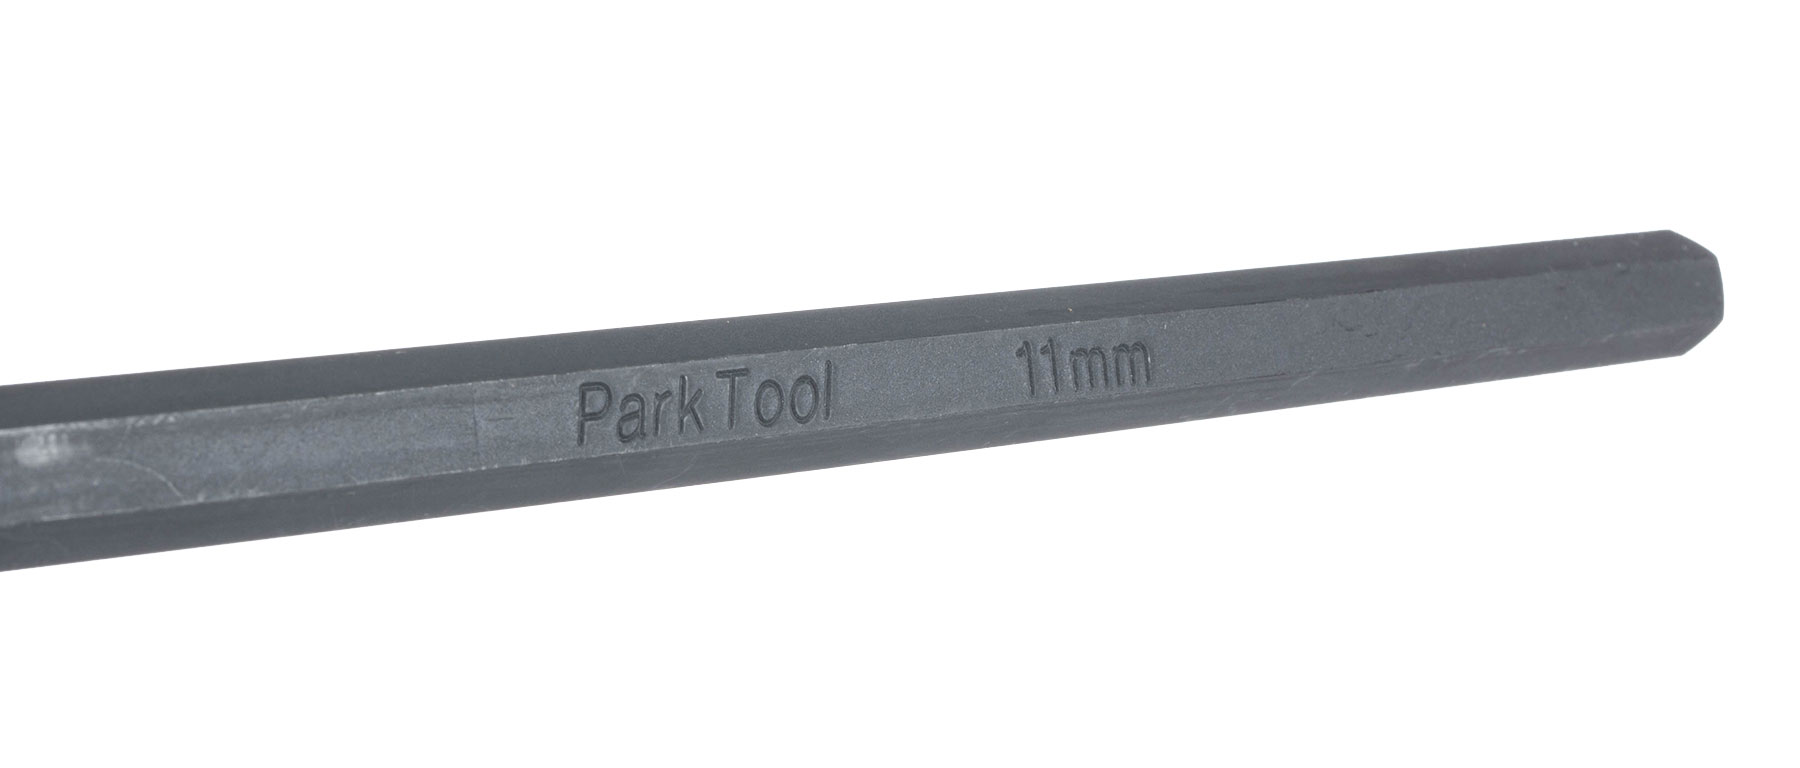 Park Tool HR Hex Wrench